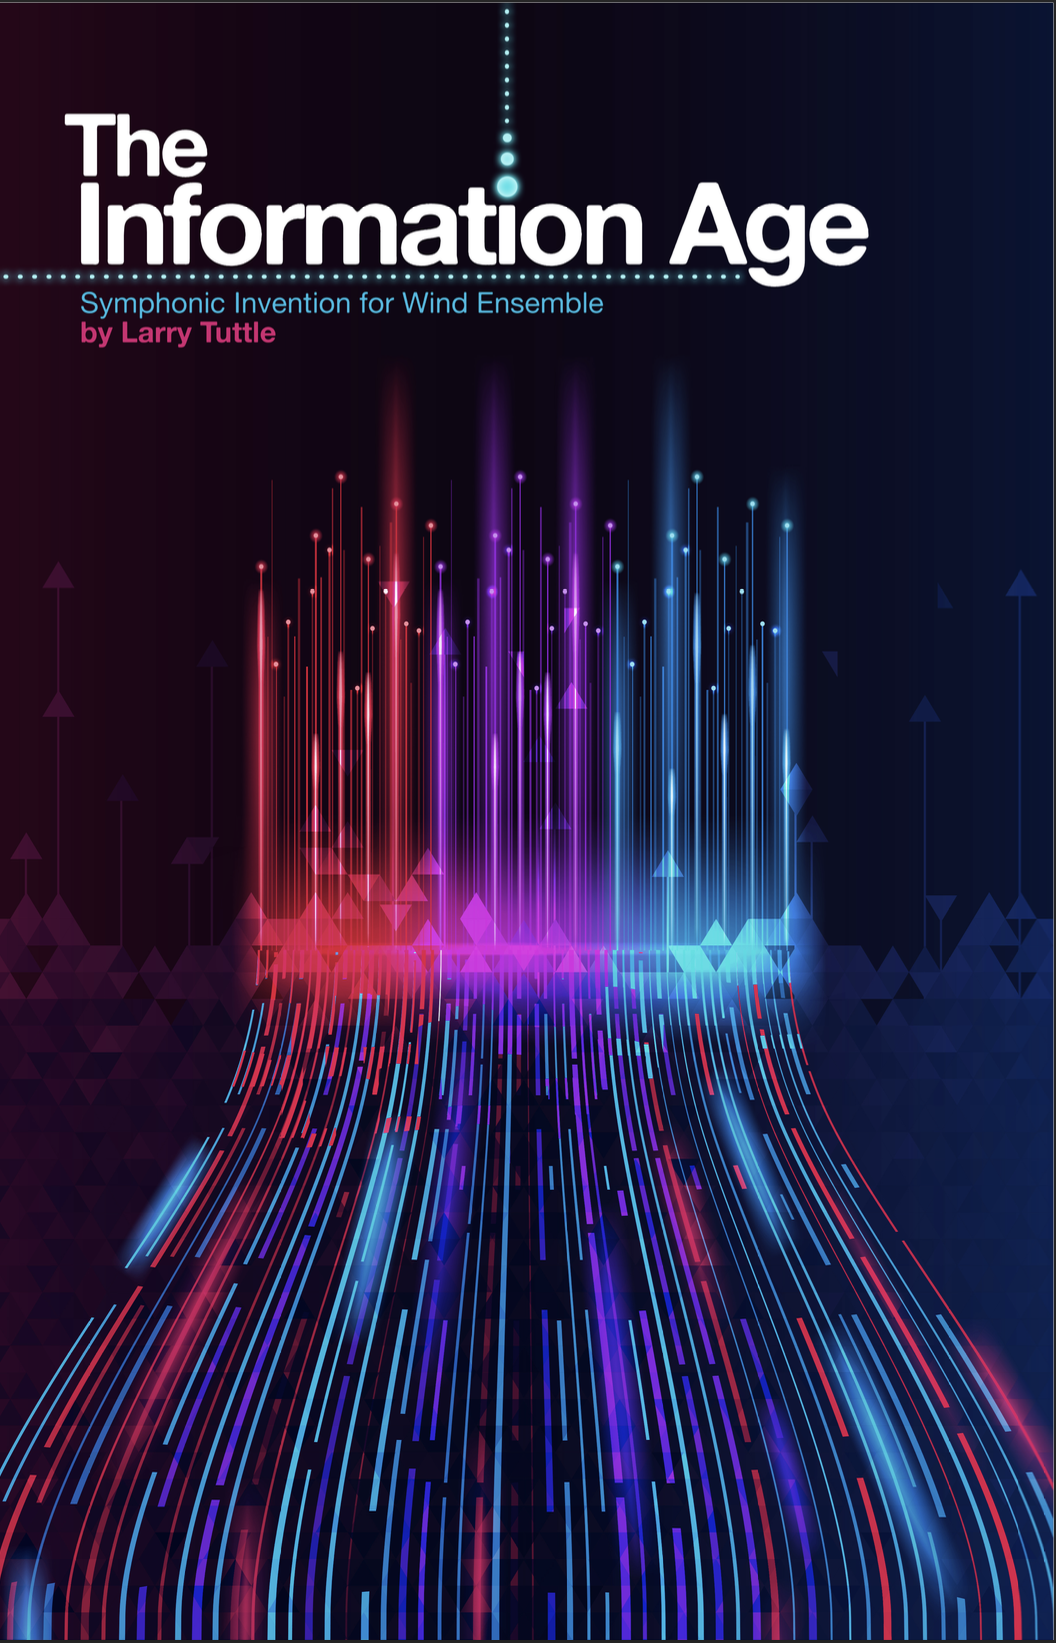 The Information Age by Larry Tuttle